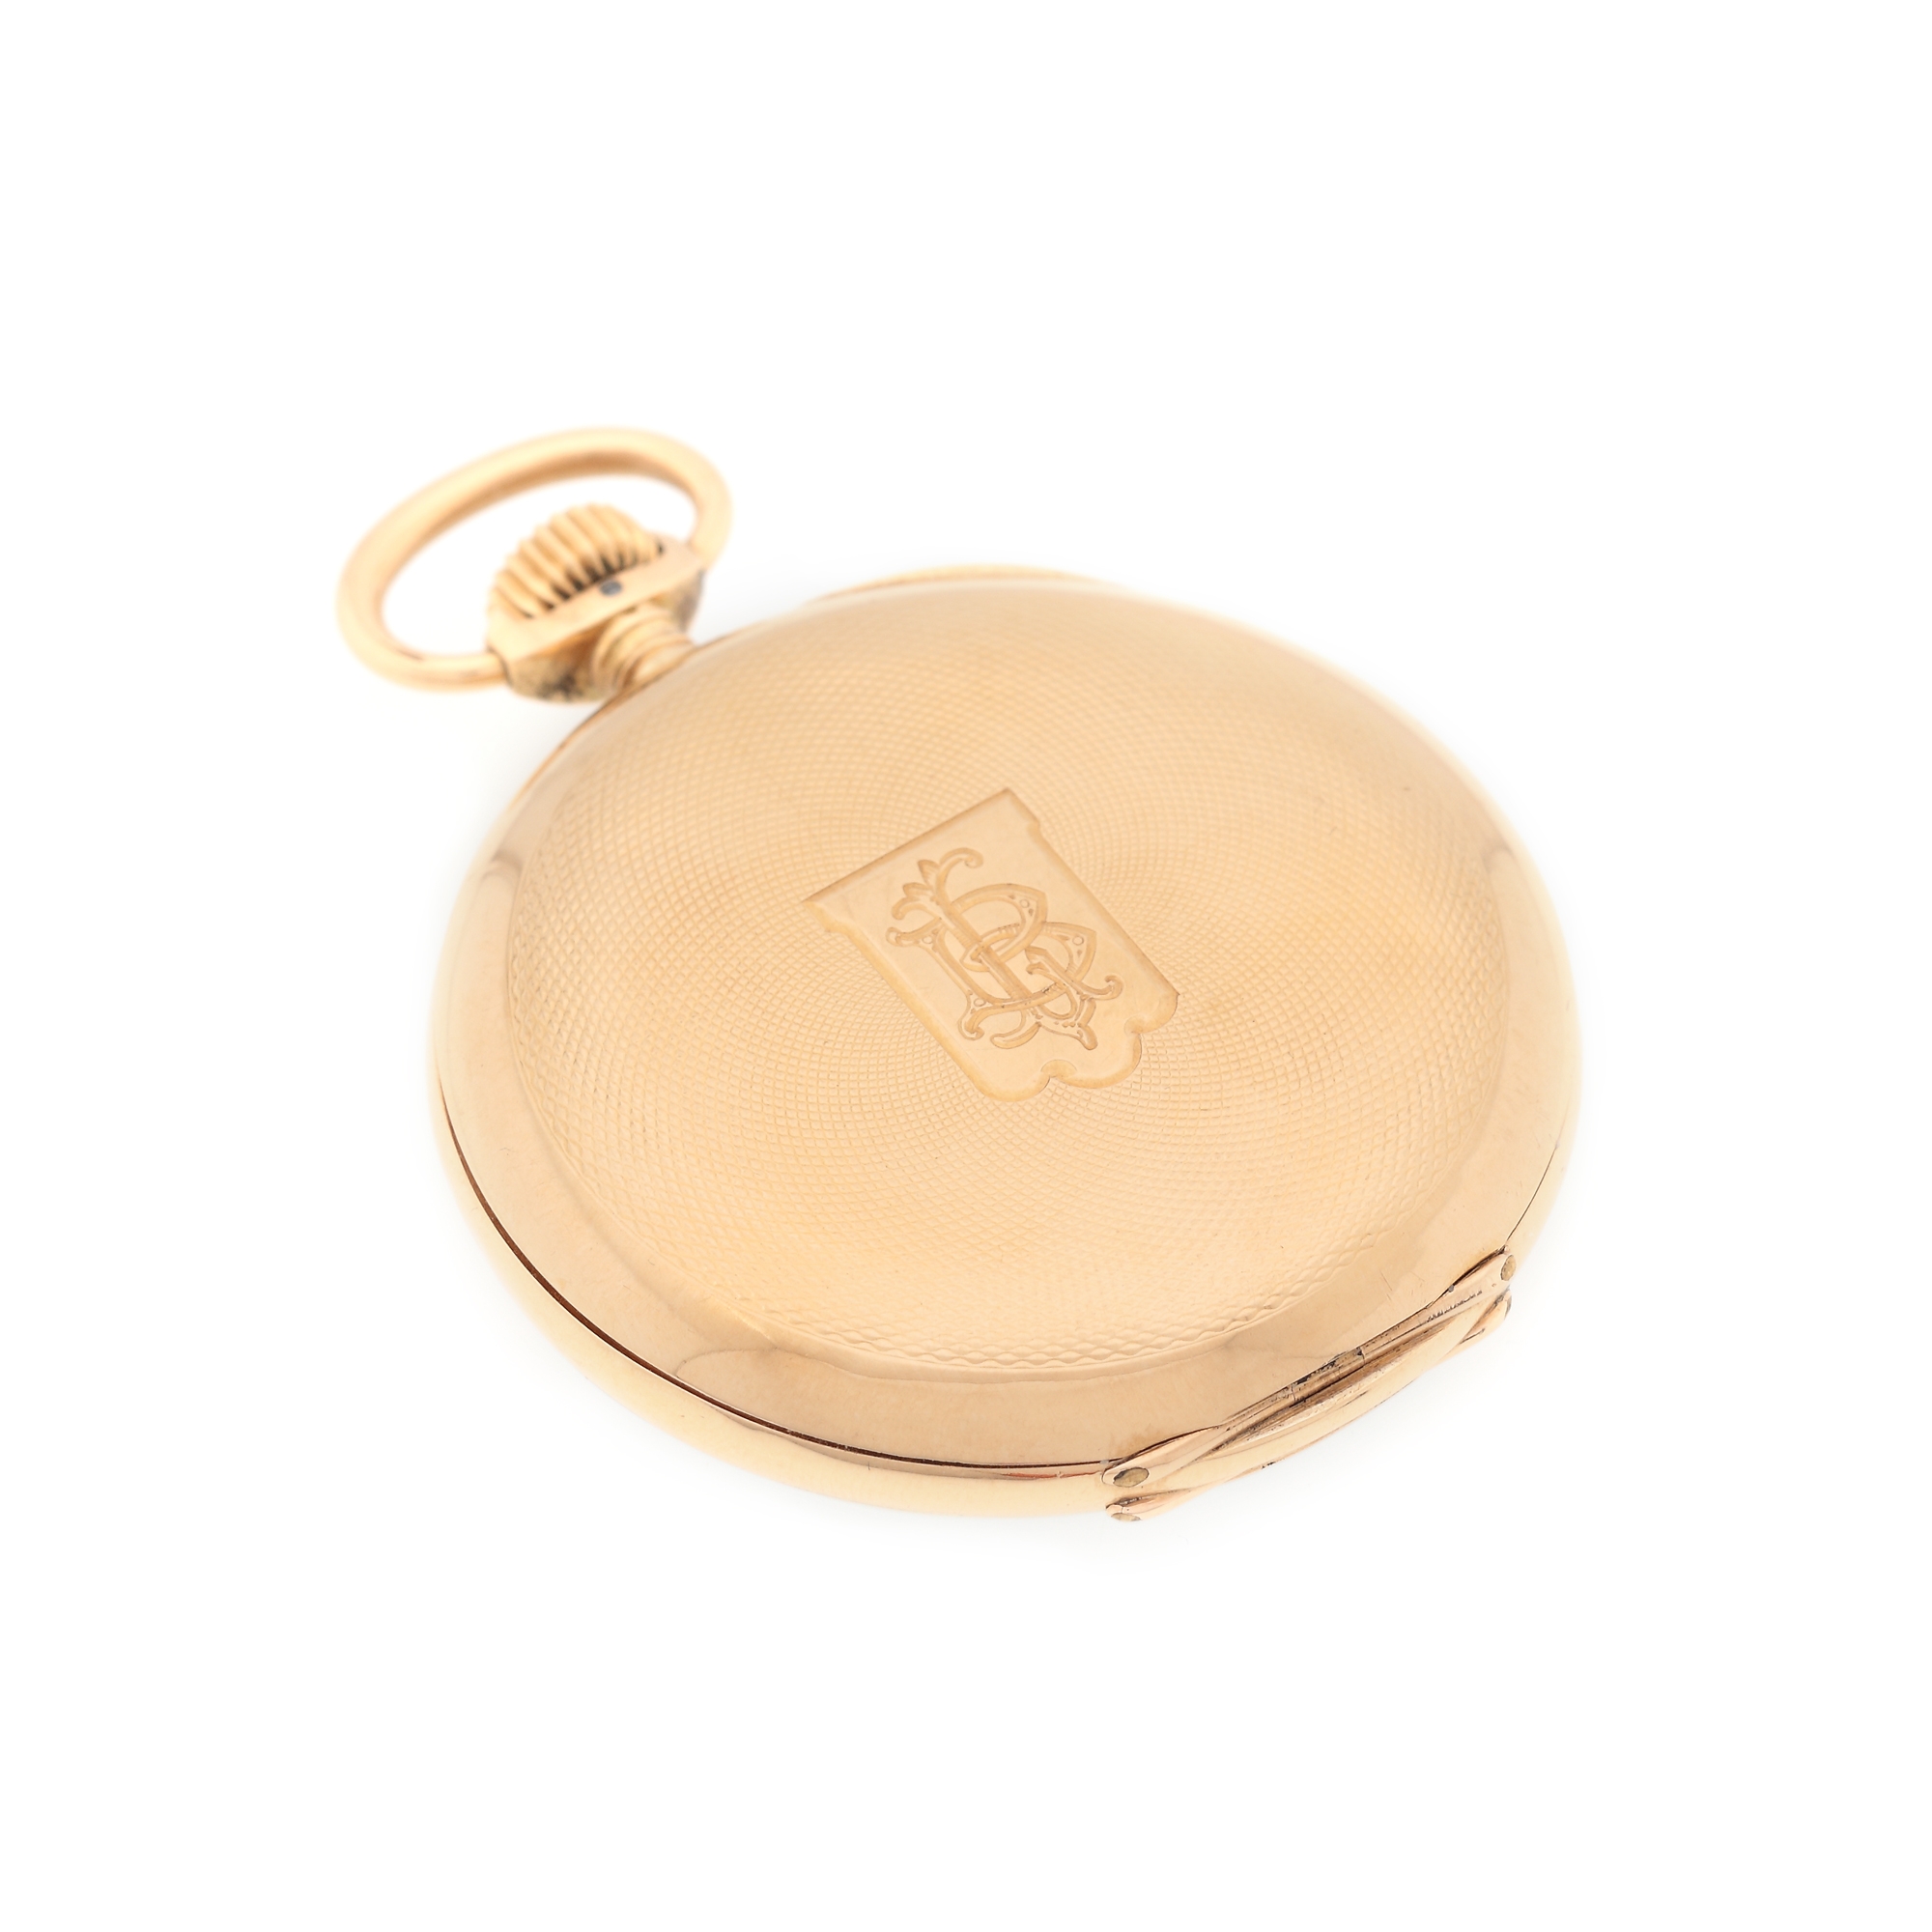 Longines pocket watch, gold, belonged to a prince Ghica - Image 5 of 5